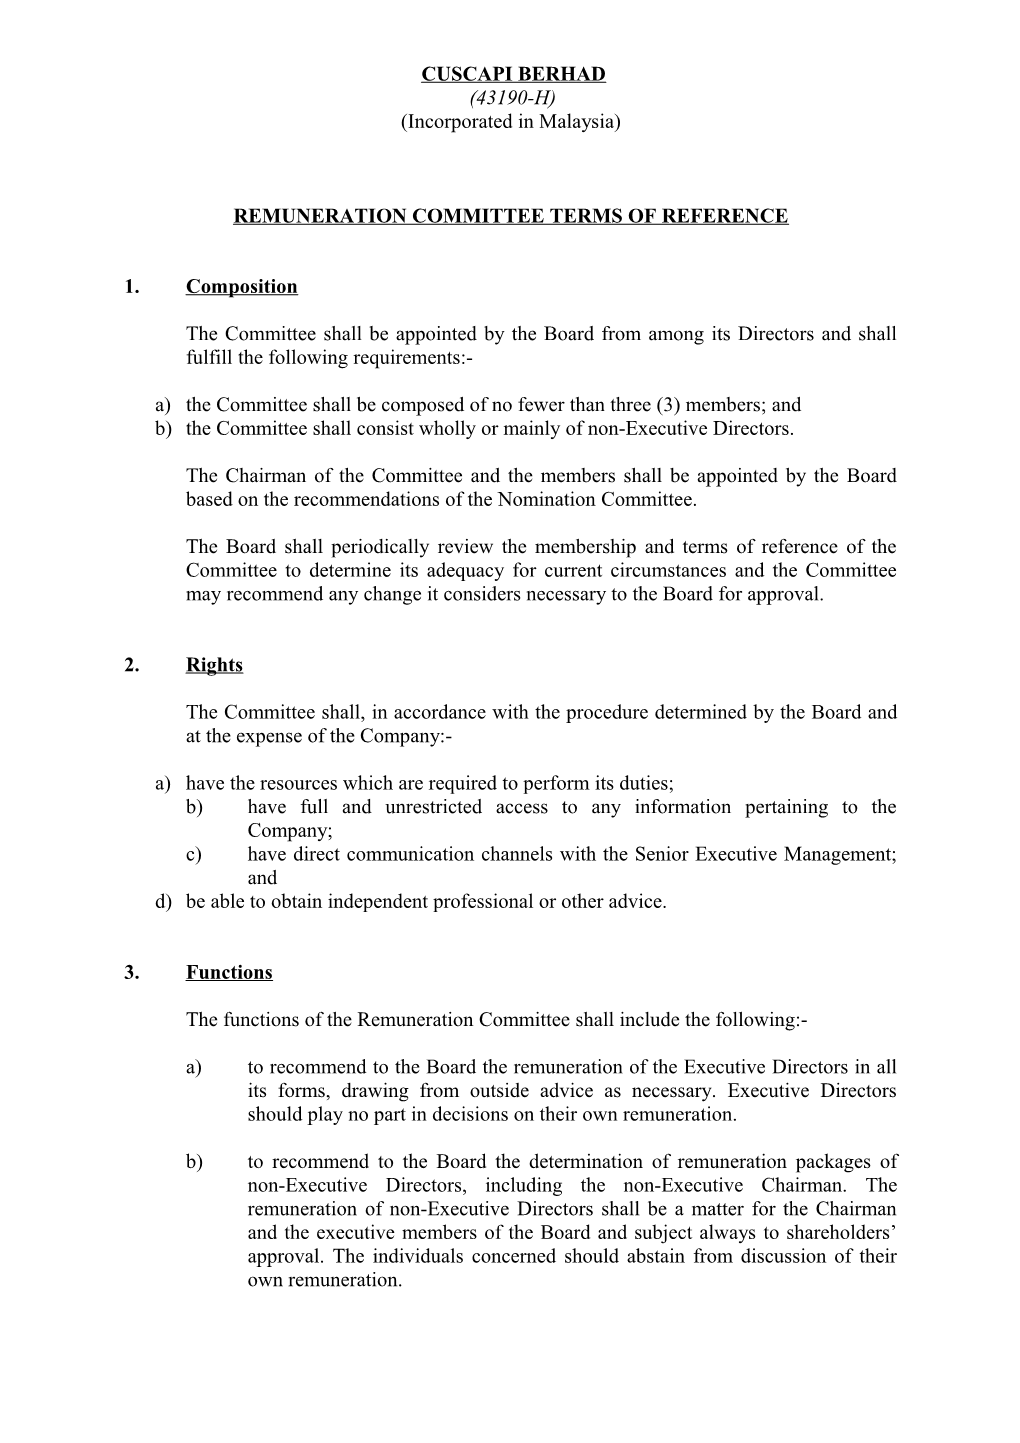 Remuneration Committee Terms of Reference